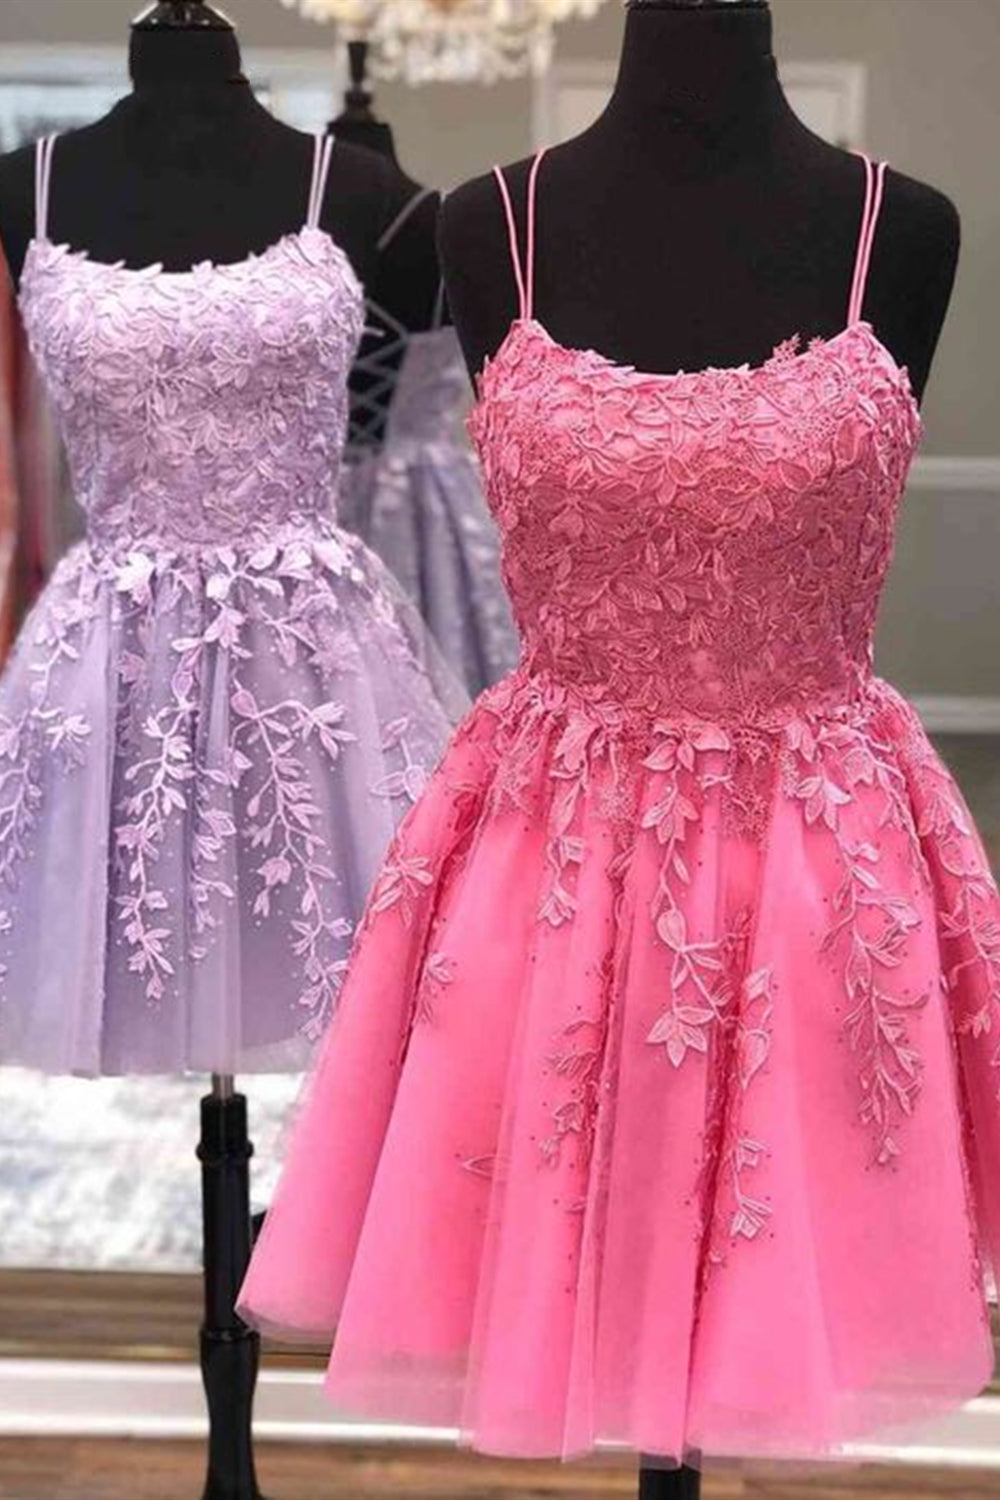 Cute Scoop Neck Purple Pink Lace Prom Homecoming Dresses, Short Purple Pink Lace Formal Evening Dresses